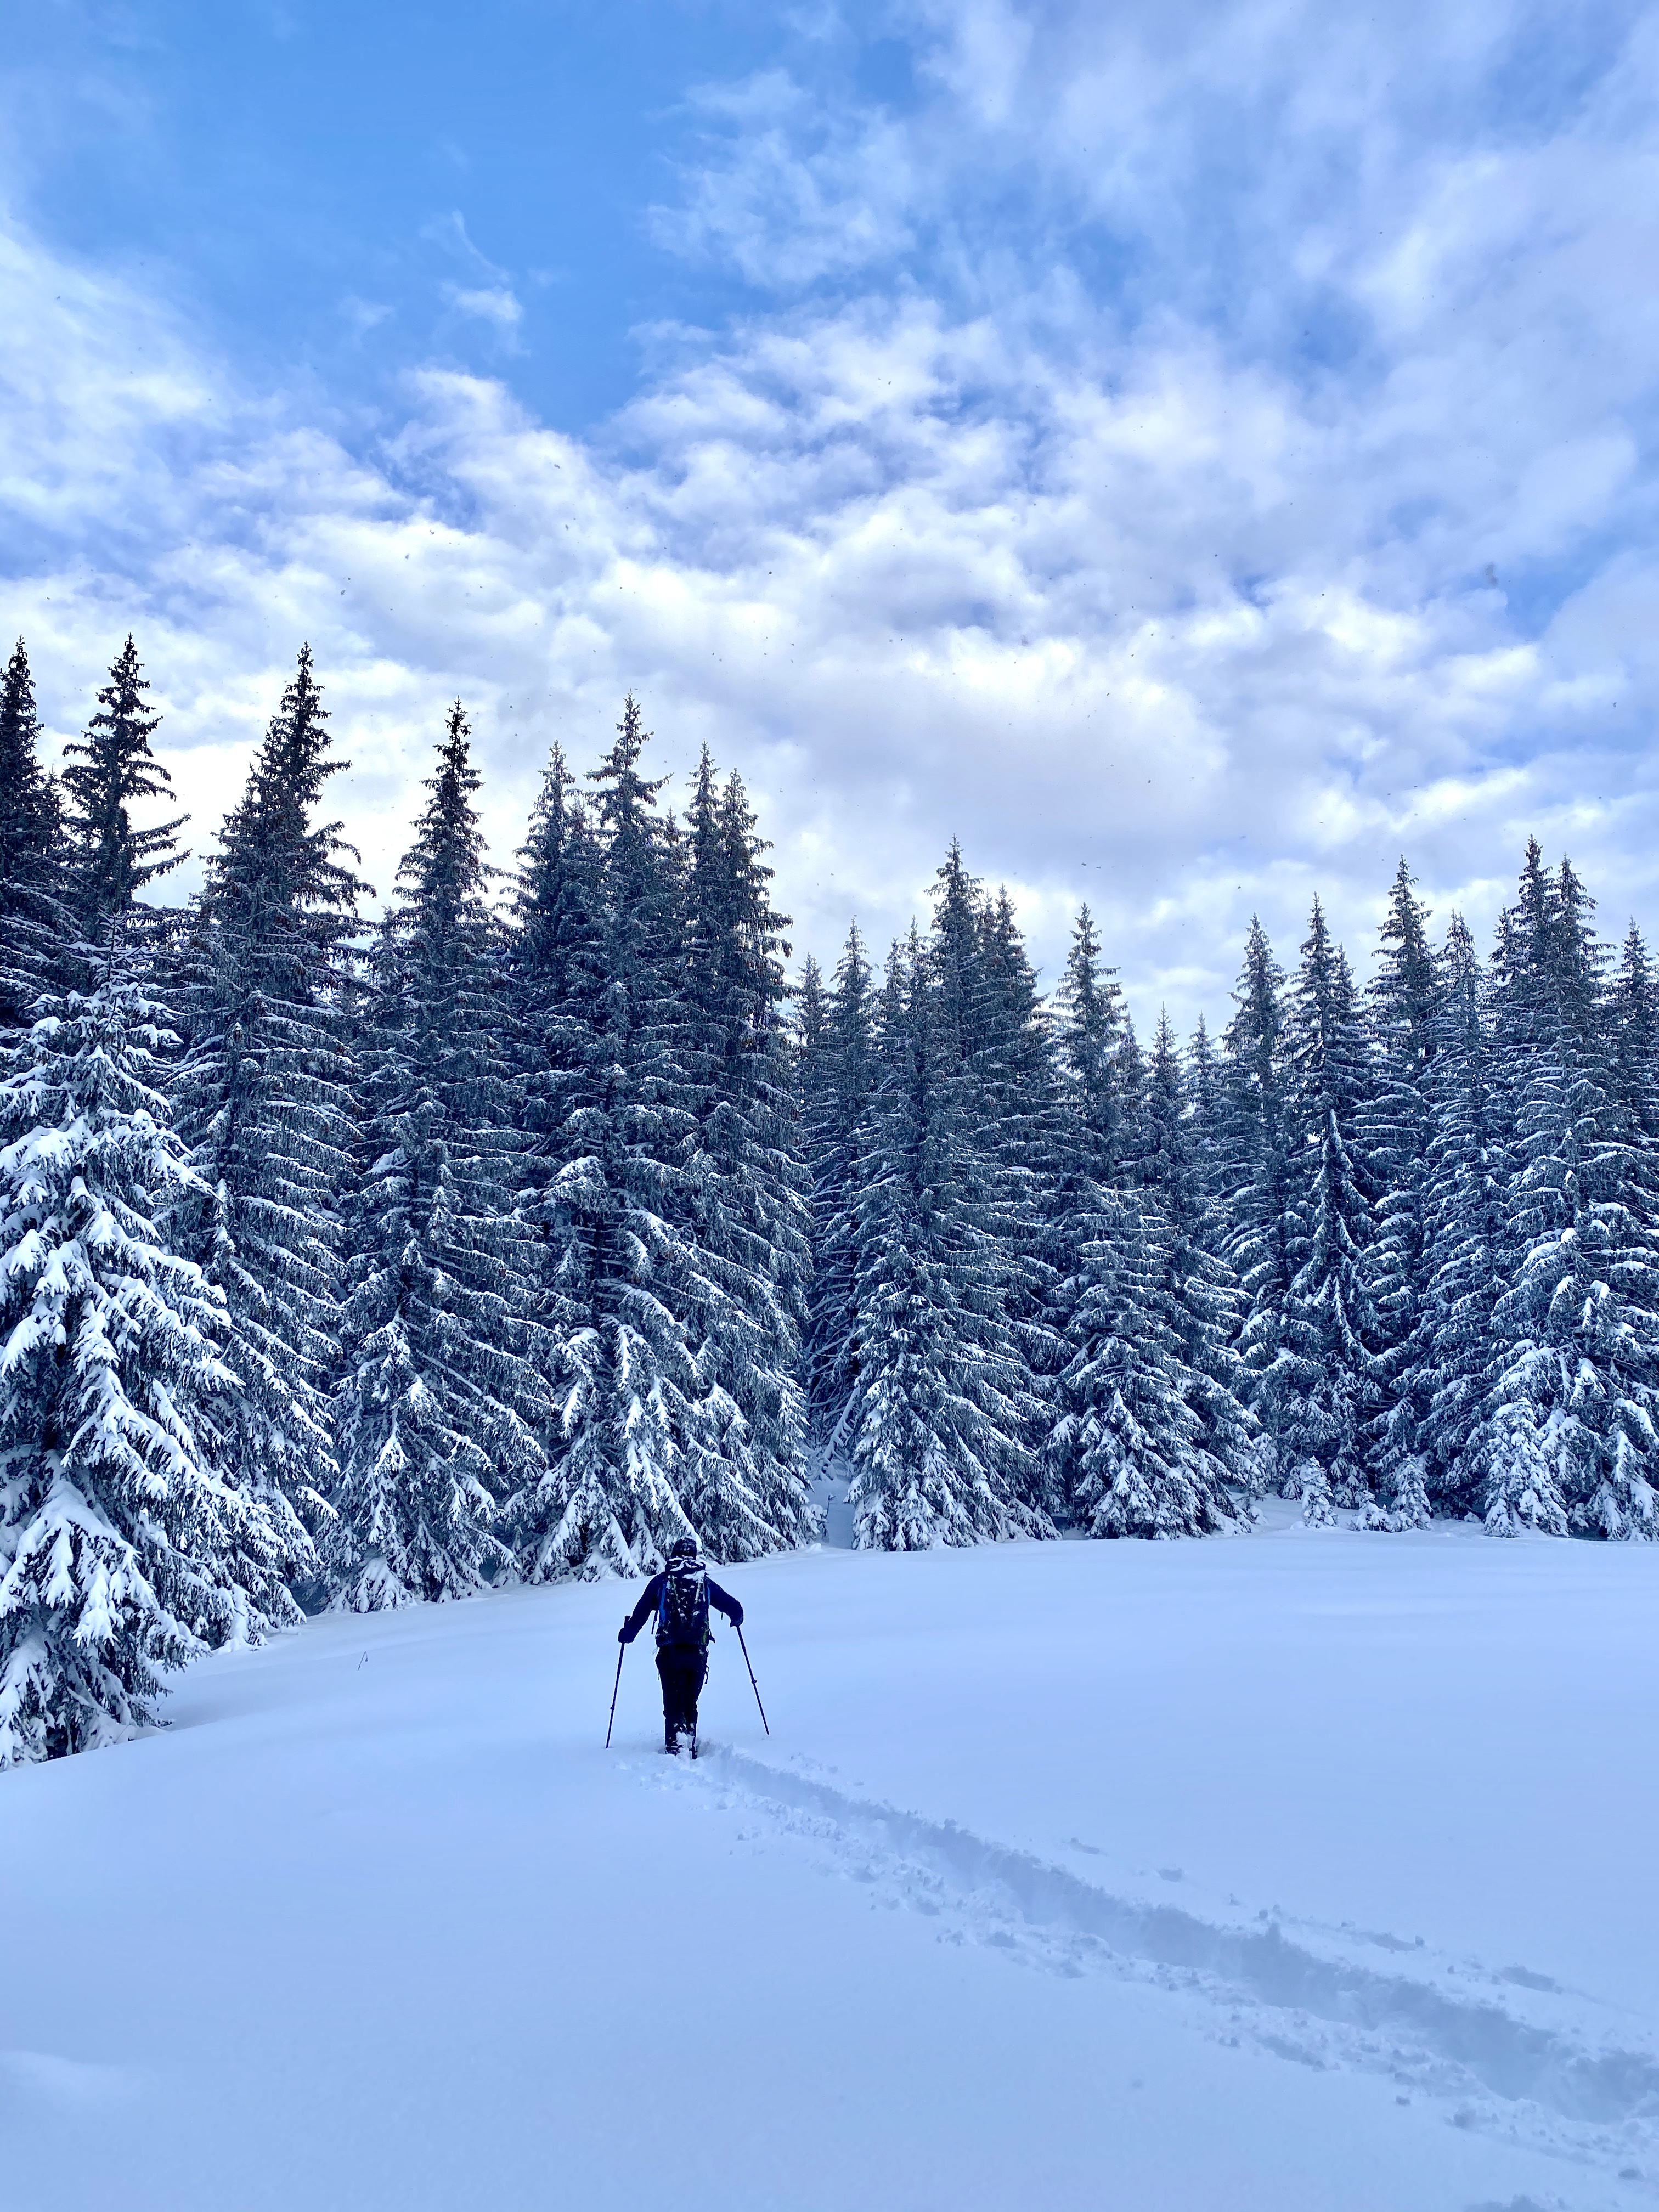 Hiking and snowshoeing - All winter activities - Les Gets